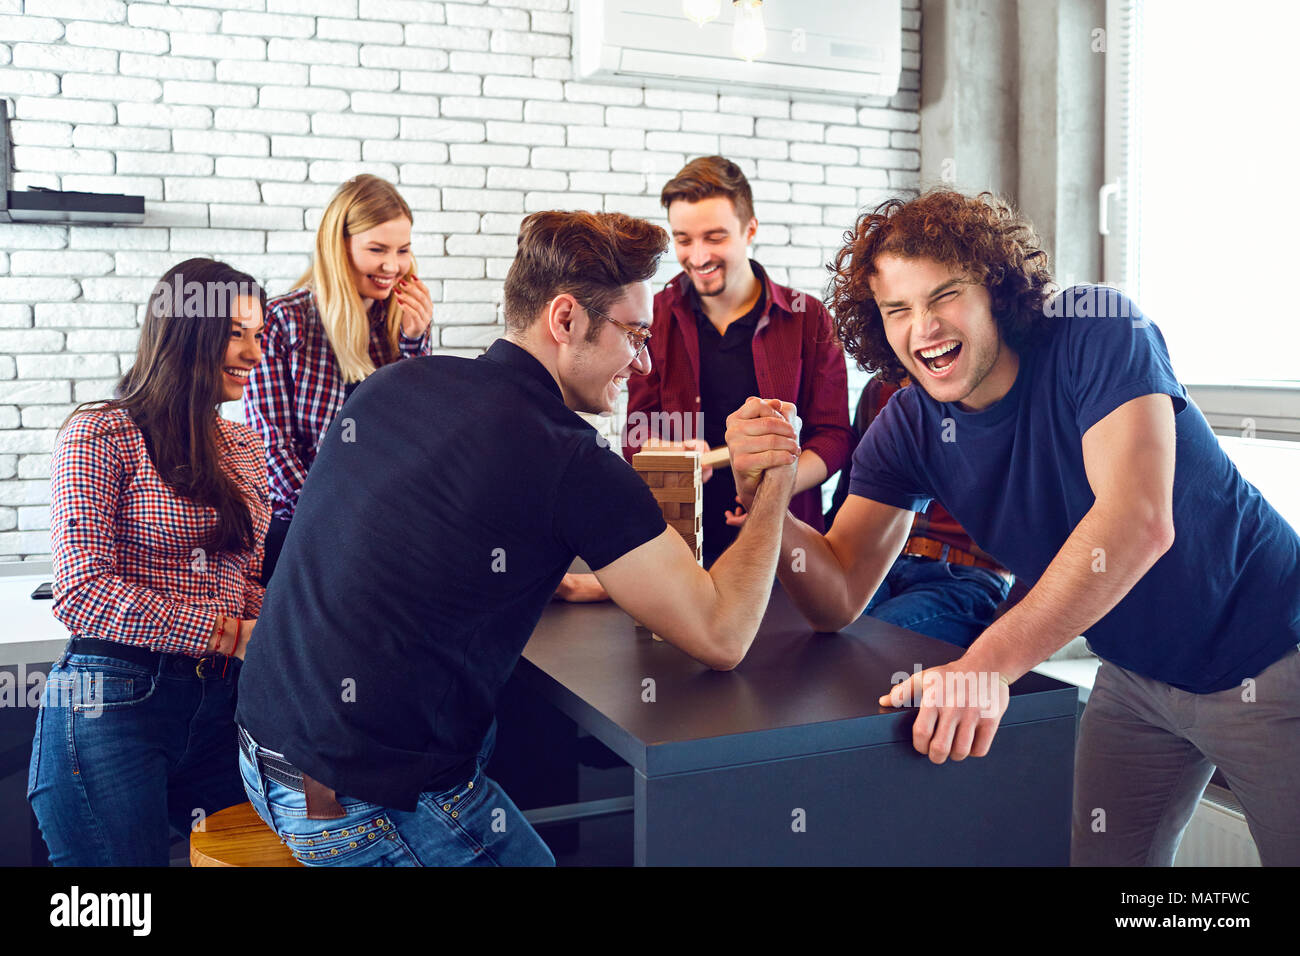 Group of friends having fun talking together in their spare time Stock Photo